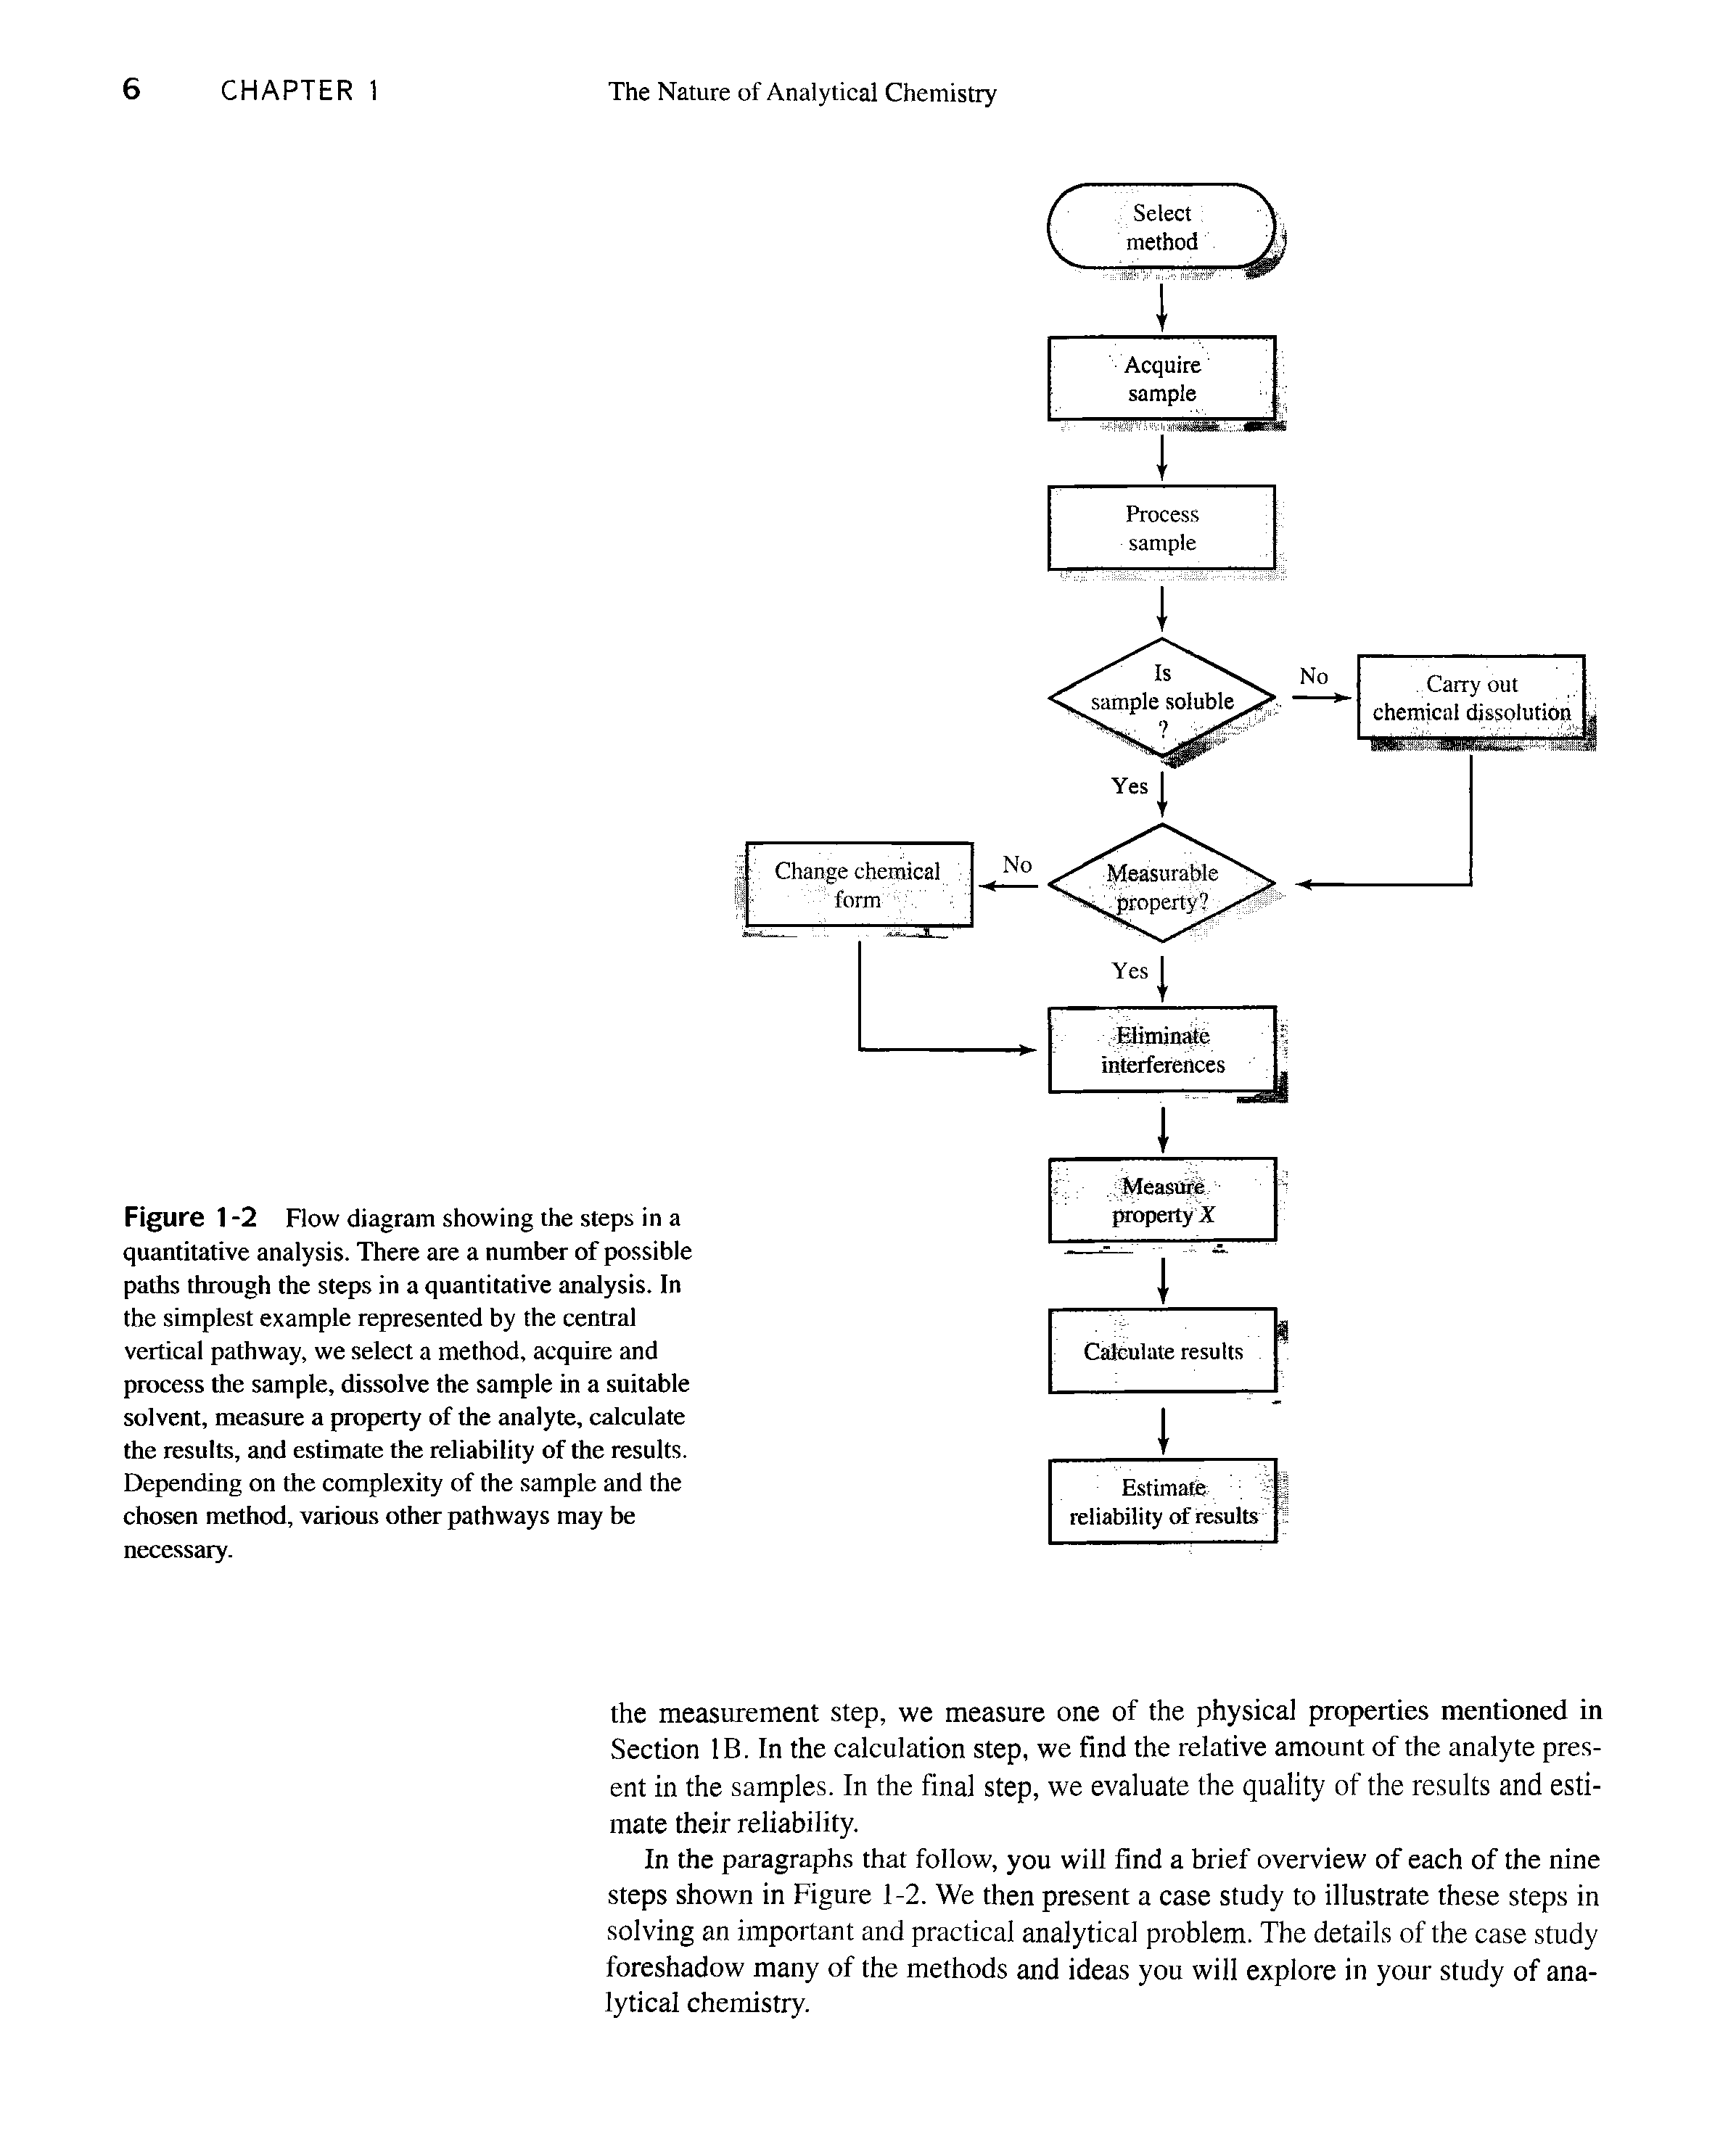 Figure 1 -2 Flow diagram showing the steps in a quantitative analysis. There are a number of possible paths through the steps in a quantitative analysis. In the simplest example represented by the central vertical pathway, we select a method, acquire and process the sample, dissolve the sample in a suitable solvent, measure a property of the analyte, calculate the results, and estimate the reliability of the results. Depending on the complexity of the sample and the chosen method, various other pathways may be necessary.